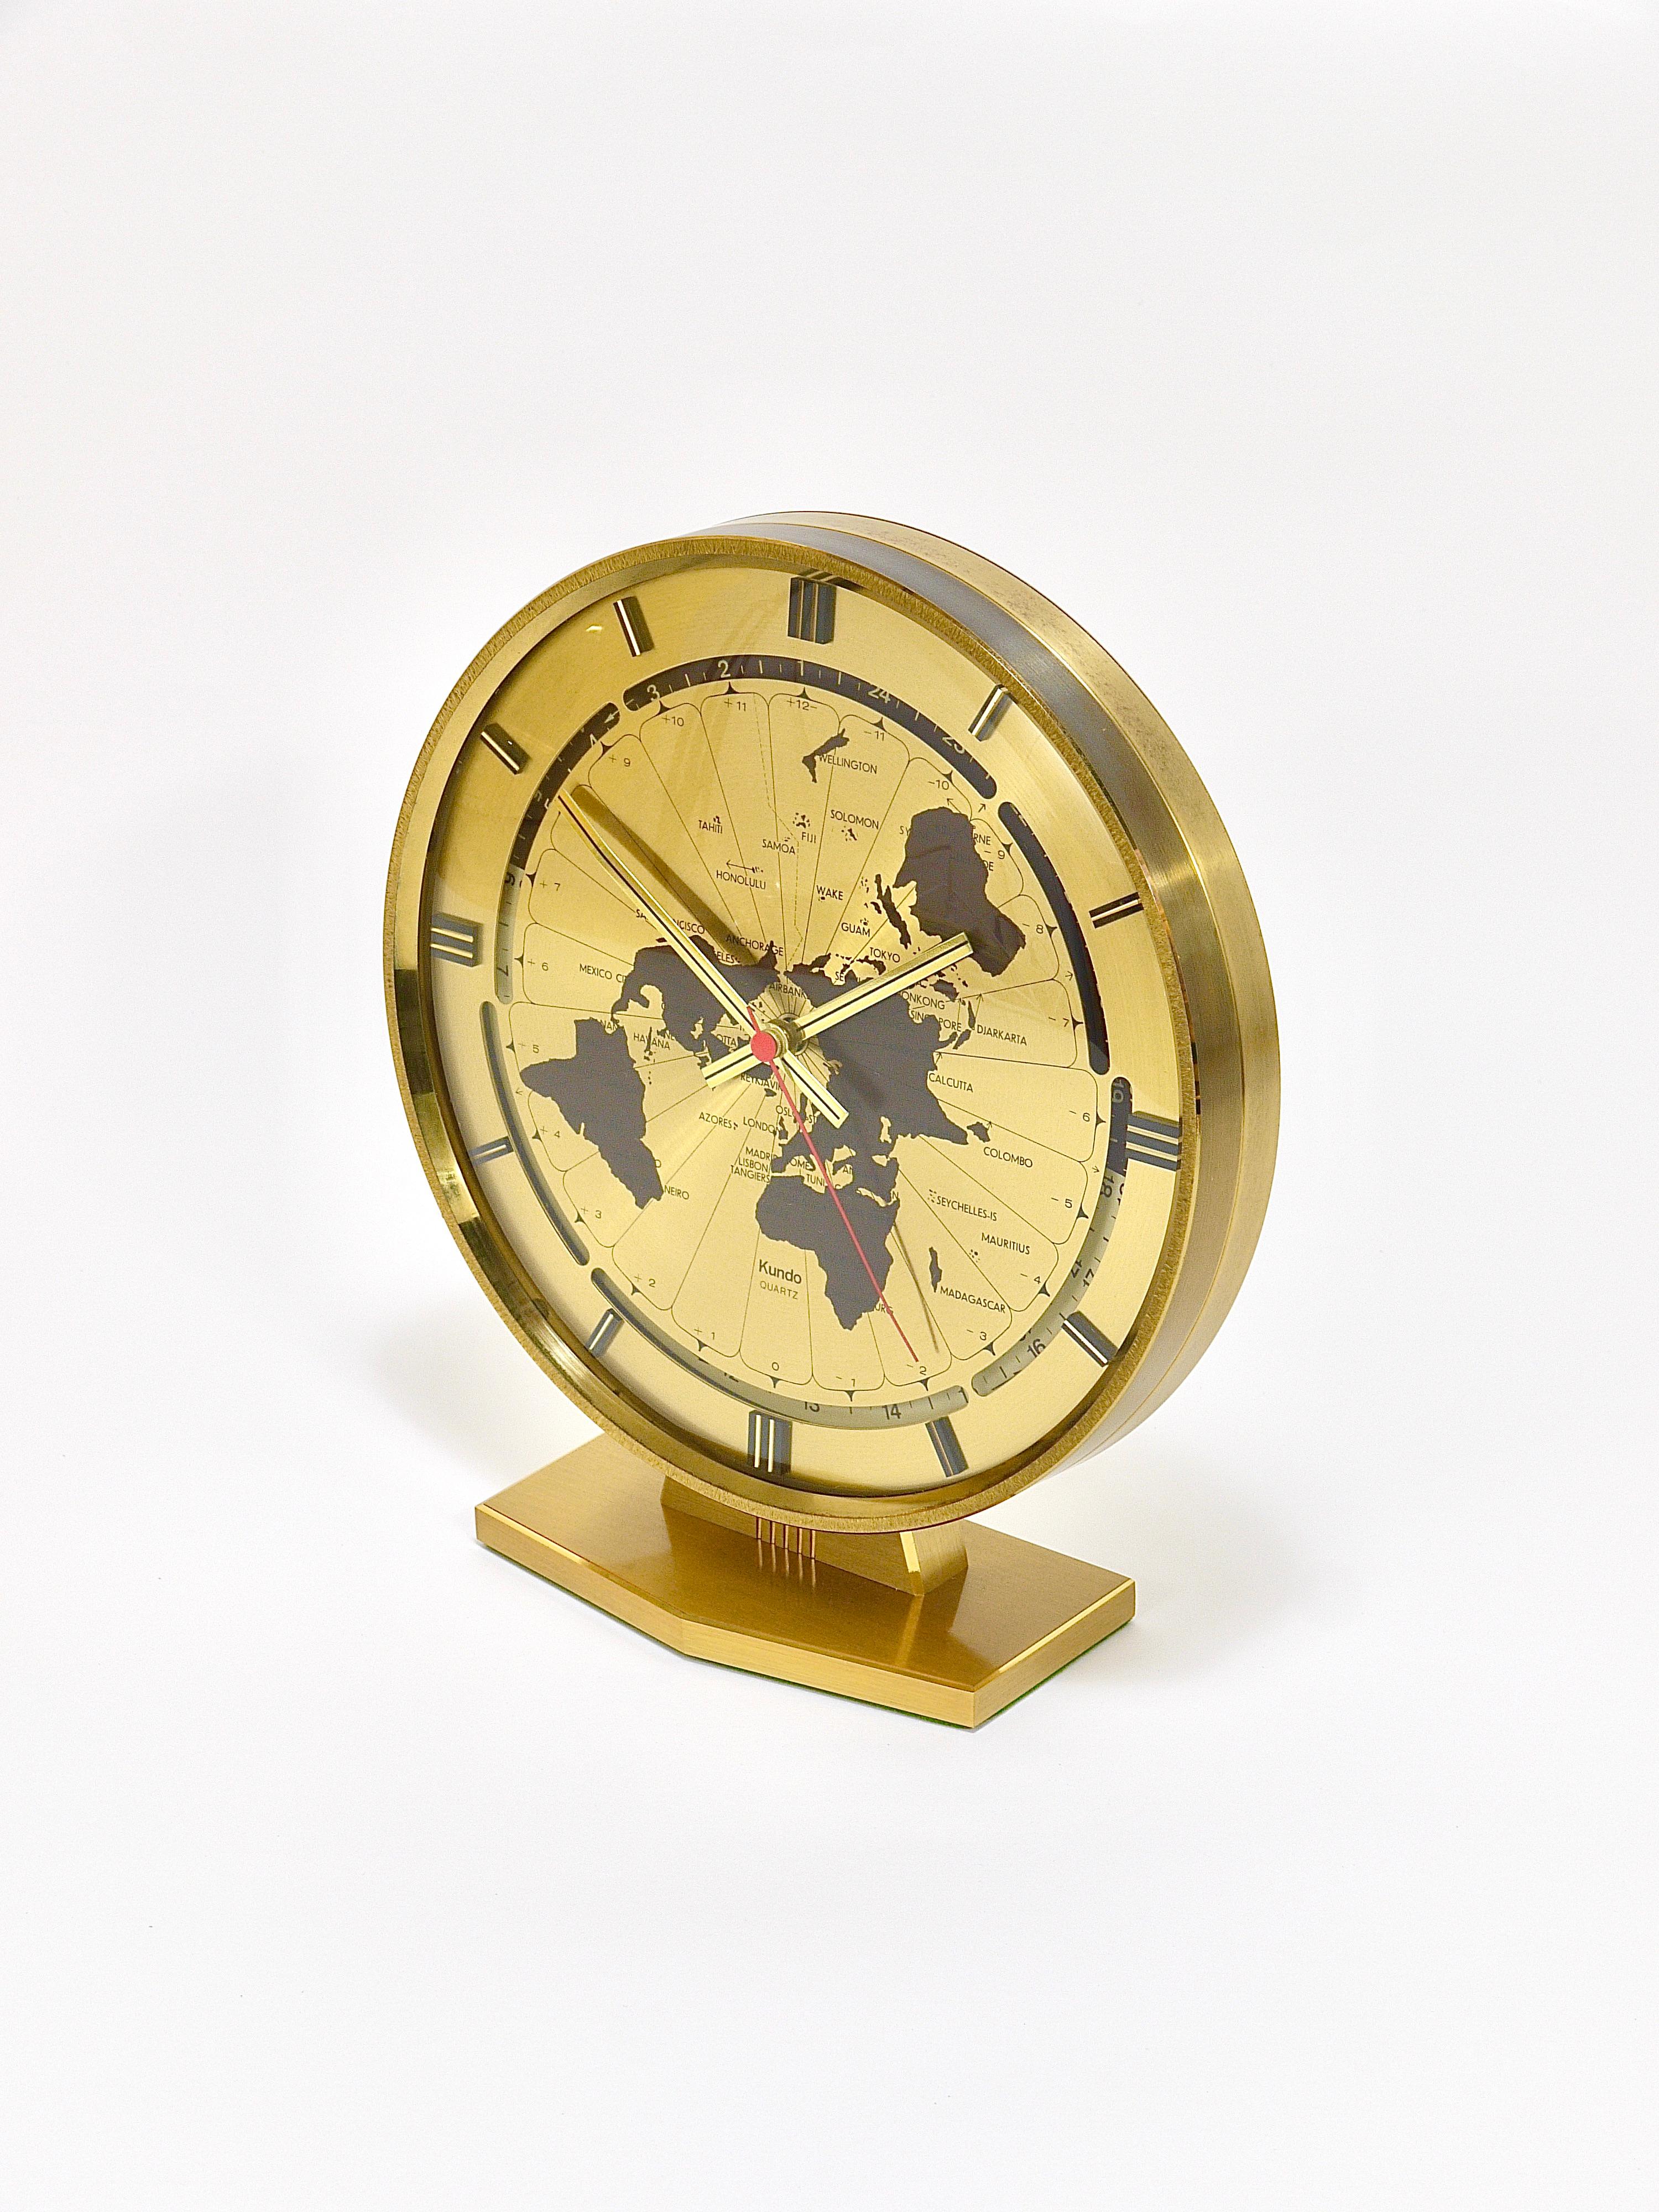 Large Kundo GMT World Time Zone Brass Table Clock, Kieninger & Obergfell, 1960s For Sale 2